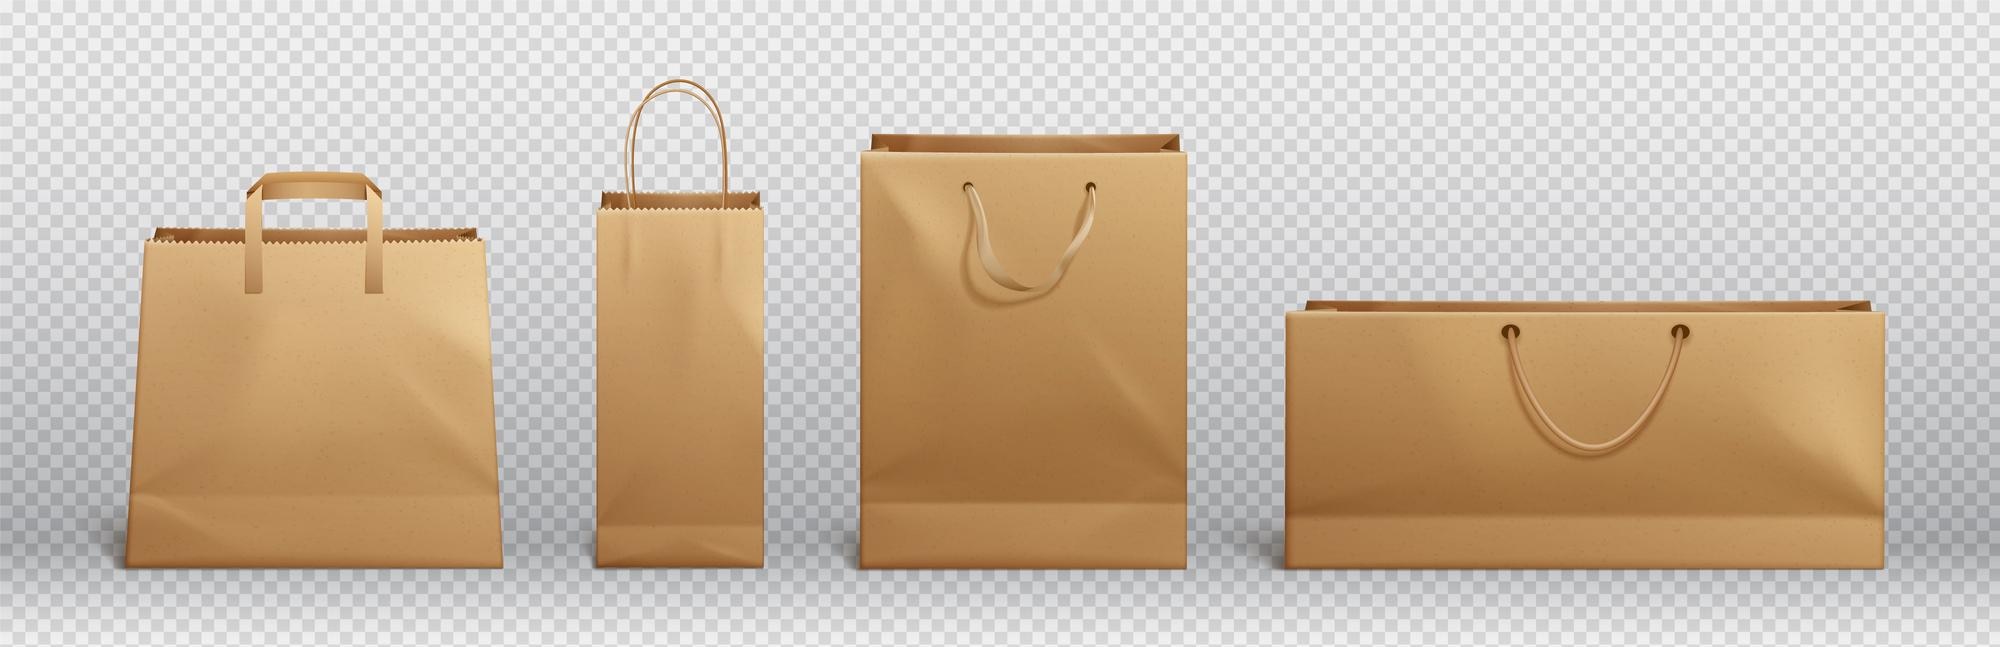 Brown paper bag for food packing with handles Vector Image